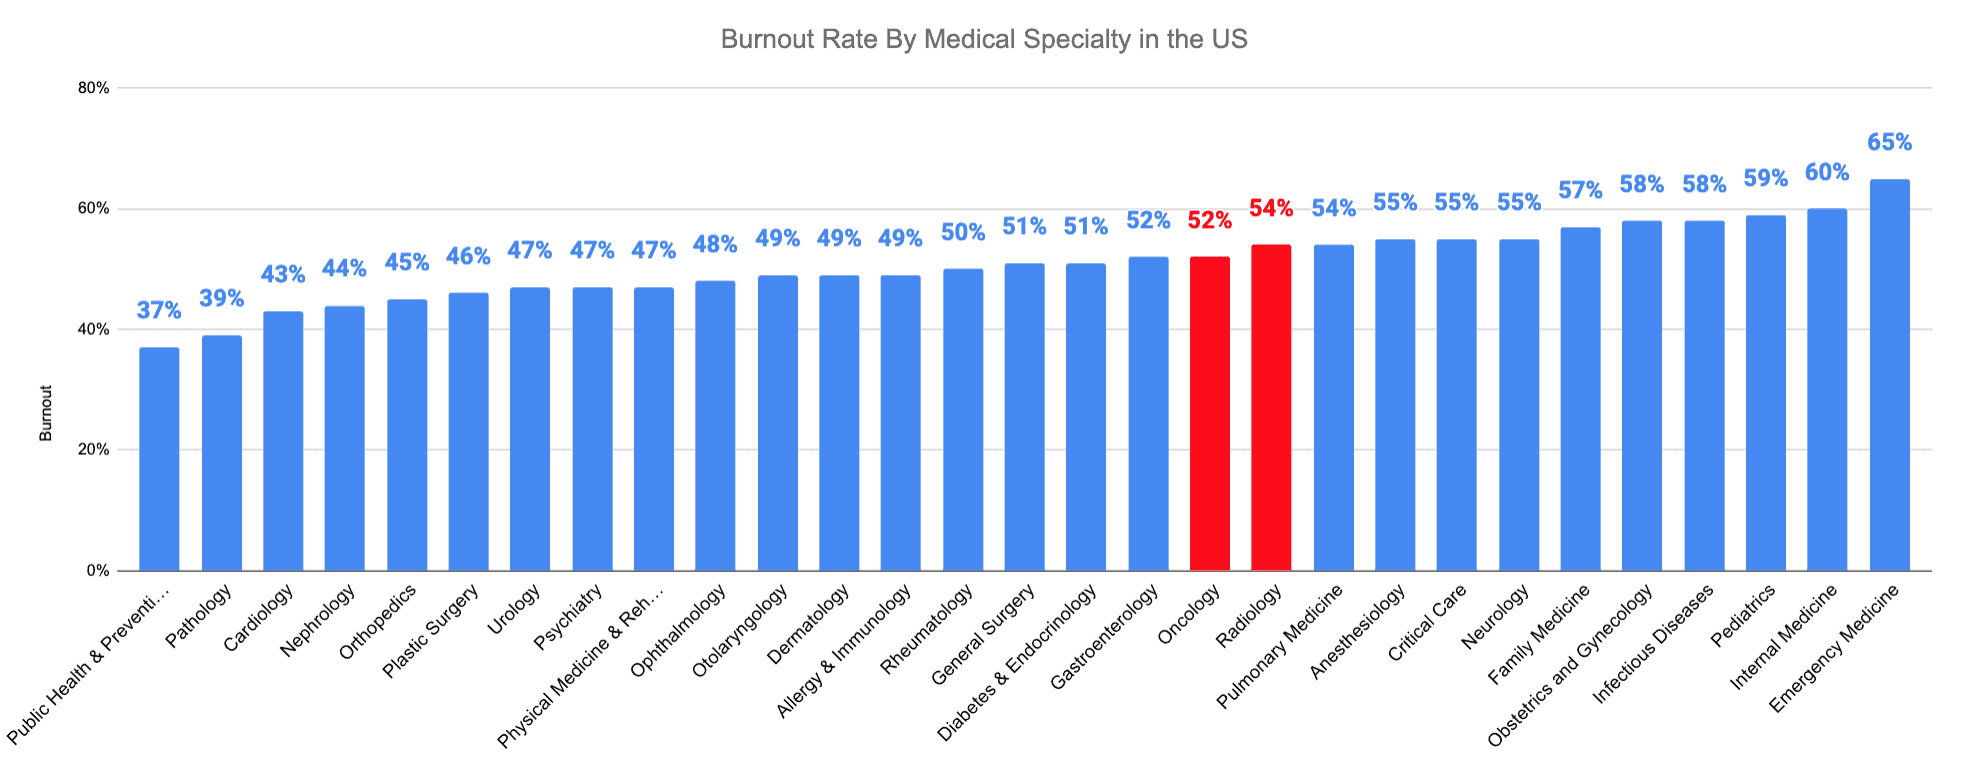 Burnout Rate By Medical Specialty in the US